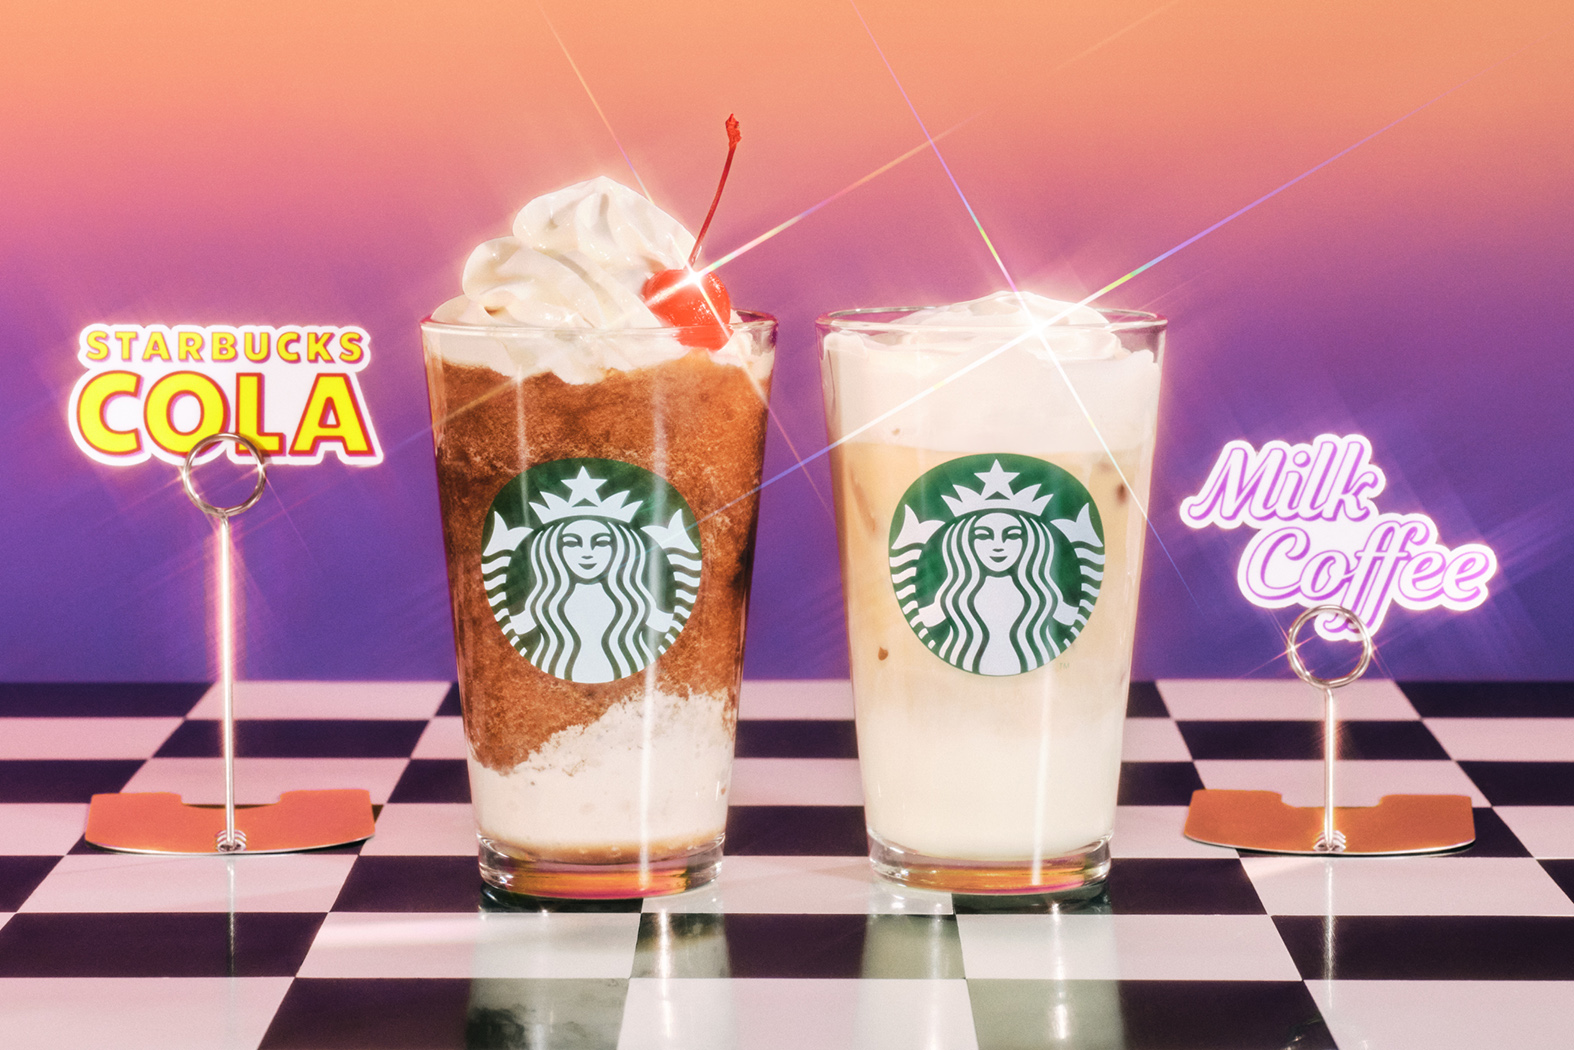 Starbucks unveils first-ever Cola Frappuccino in Japan